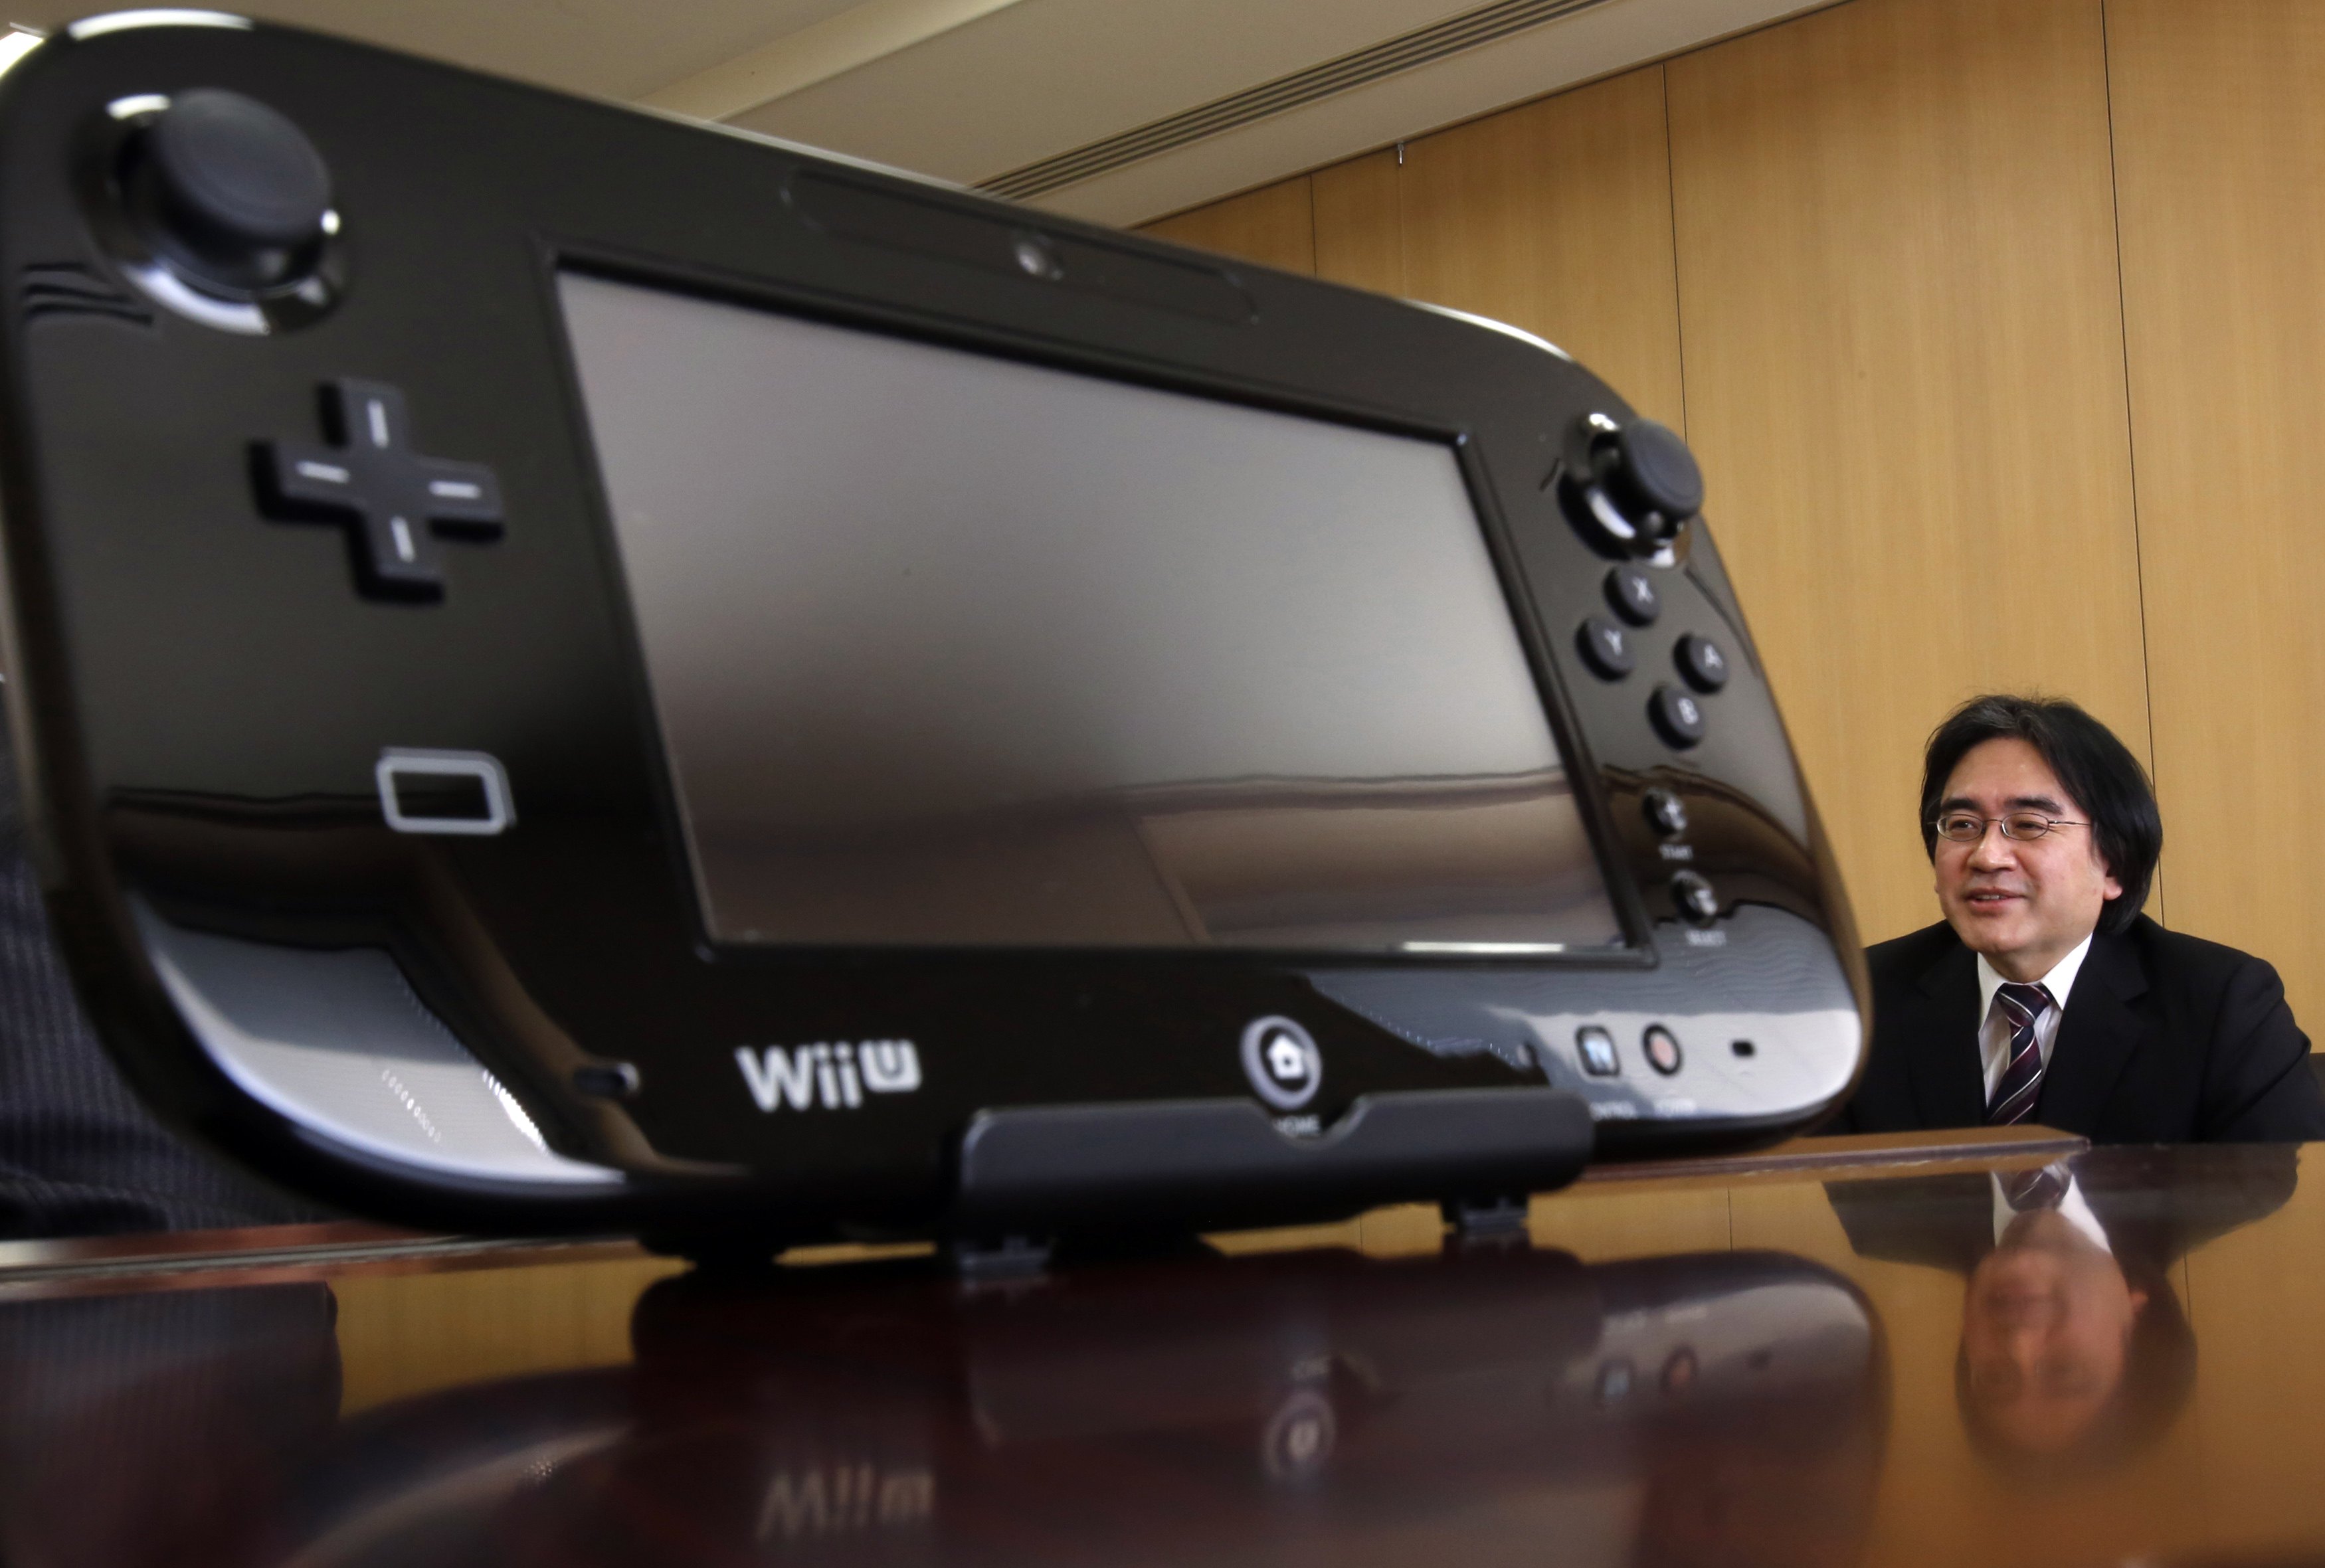 Nintendo Co's President Satoru Iwata speaks next to company's Wii U game controller during an interview with Reuters at the company headquarters in Kyoto, western Japan